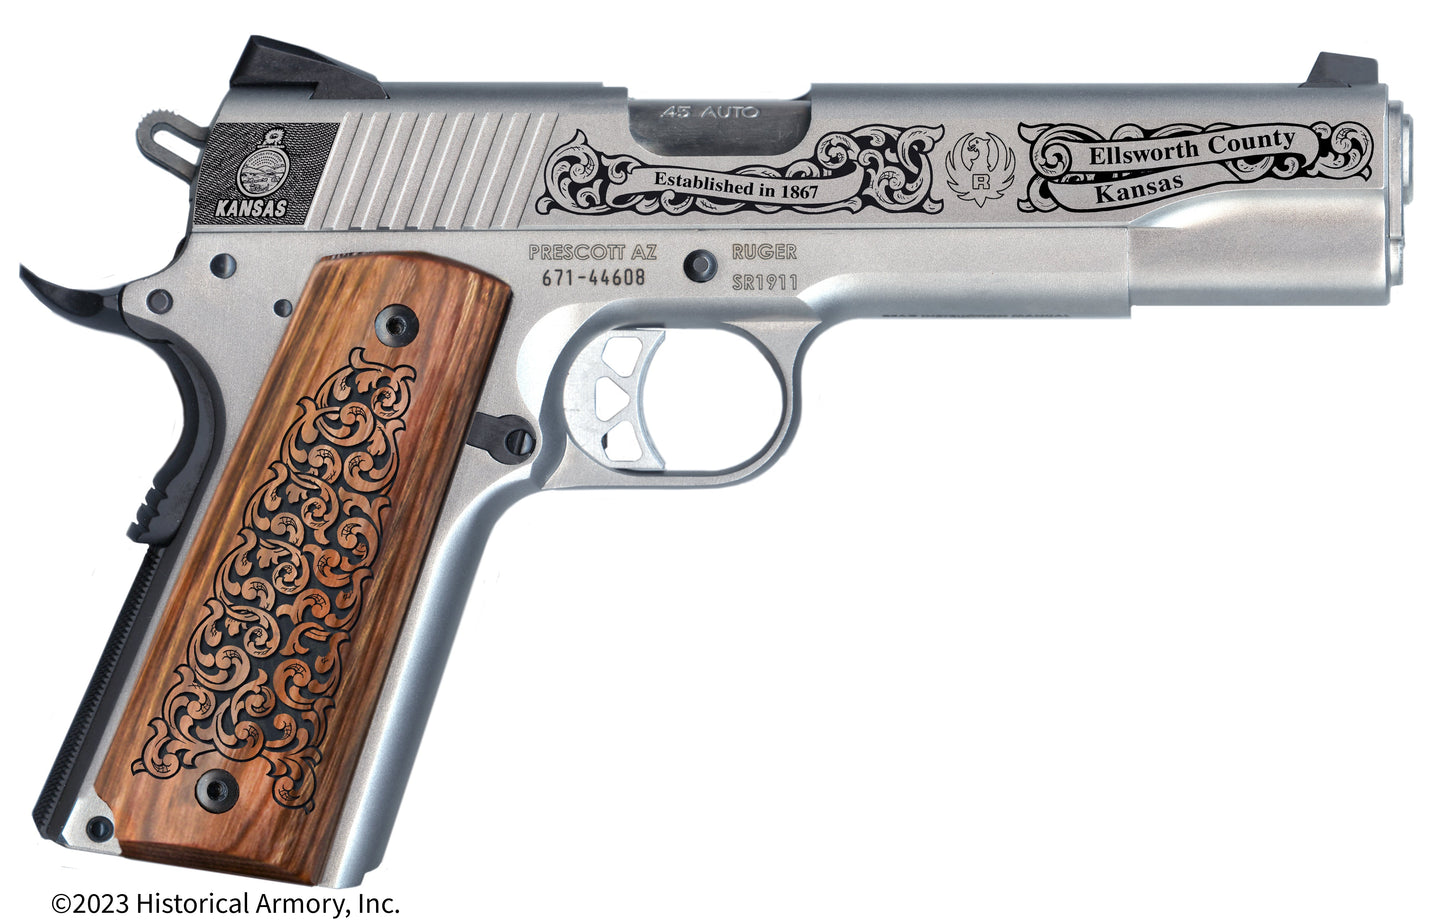 Ellsworth County Kansas Engraved .45 Auto Ruger 1911